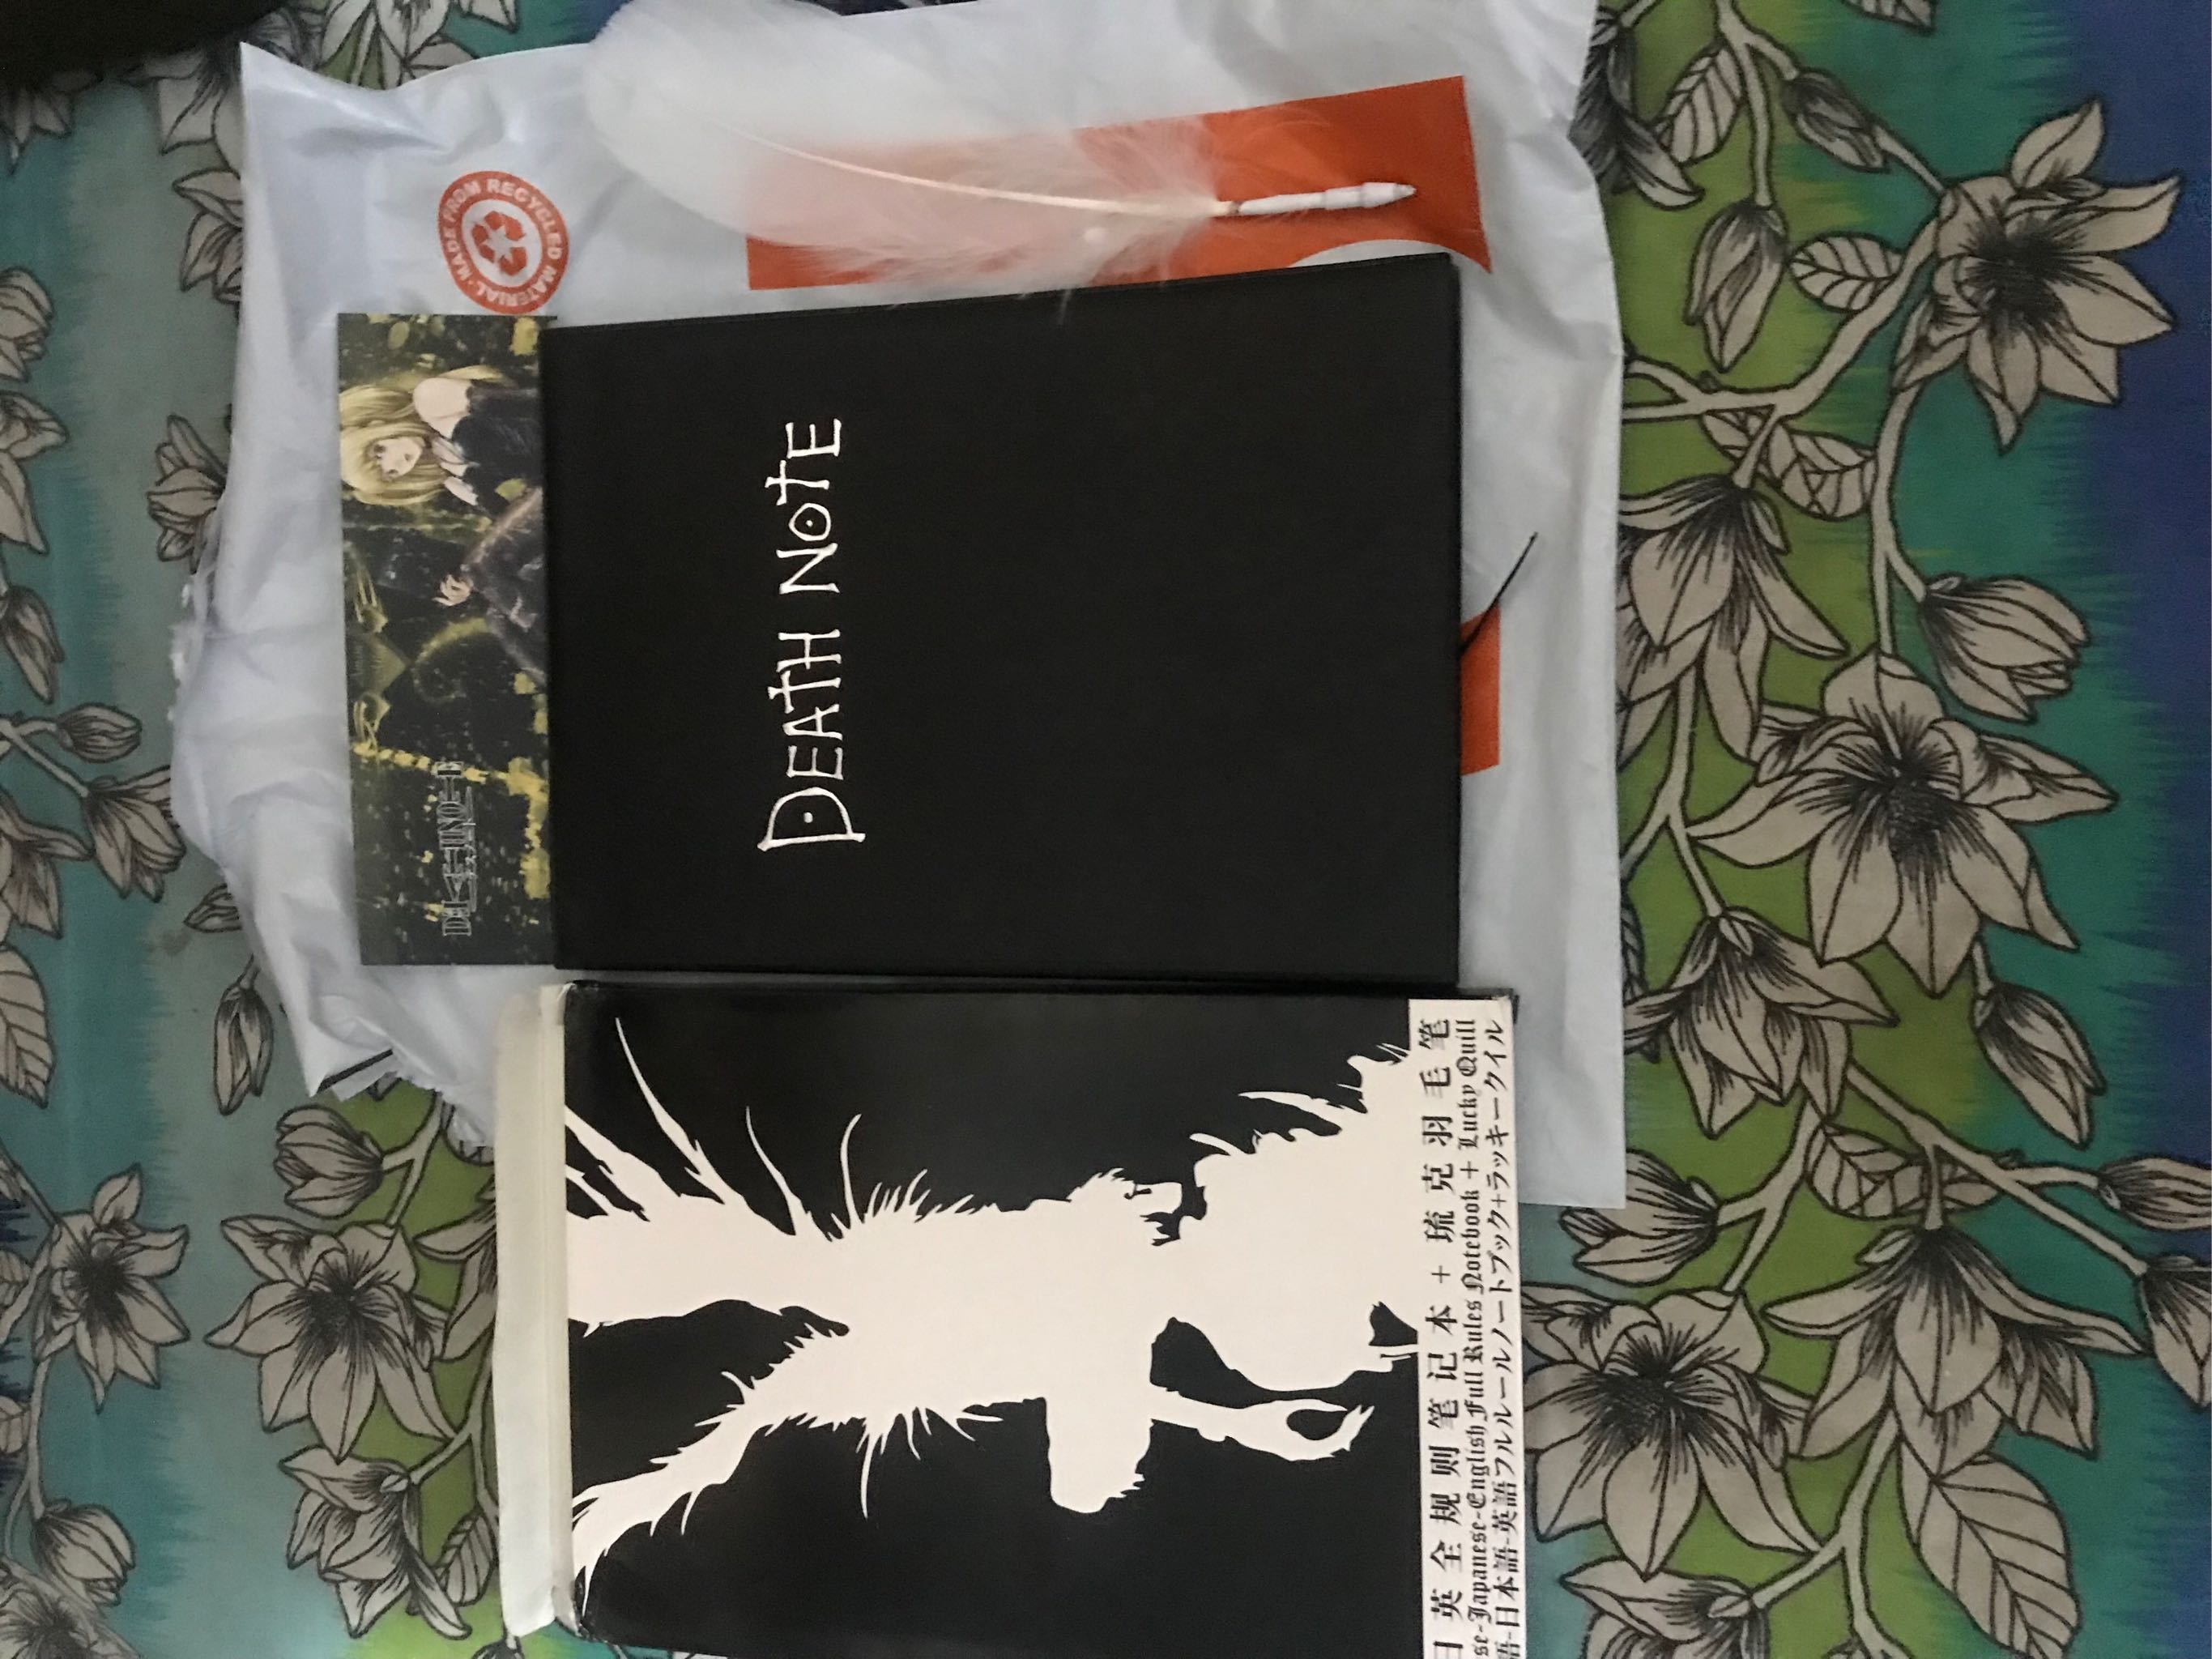 L-zonc 135 Pages Death Note Notebook with Feather Pen